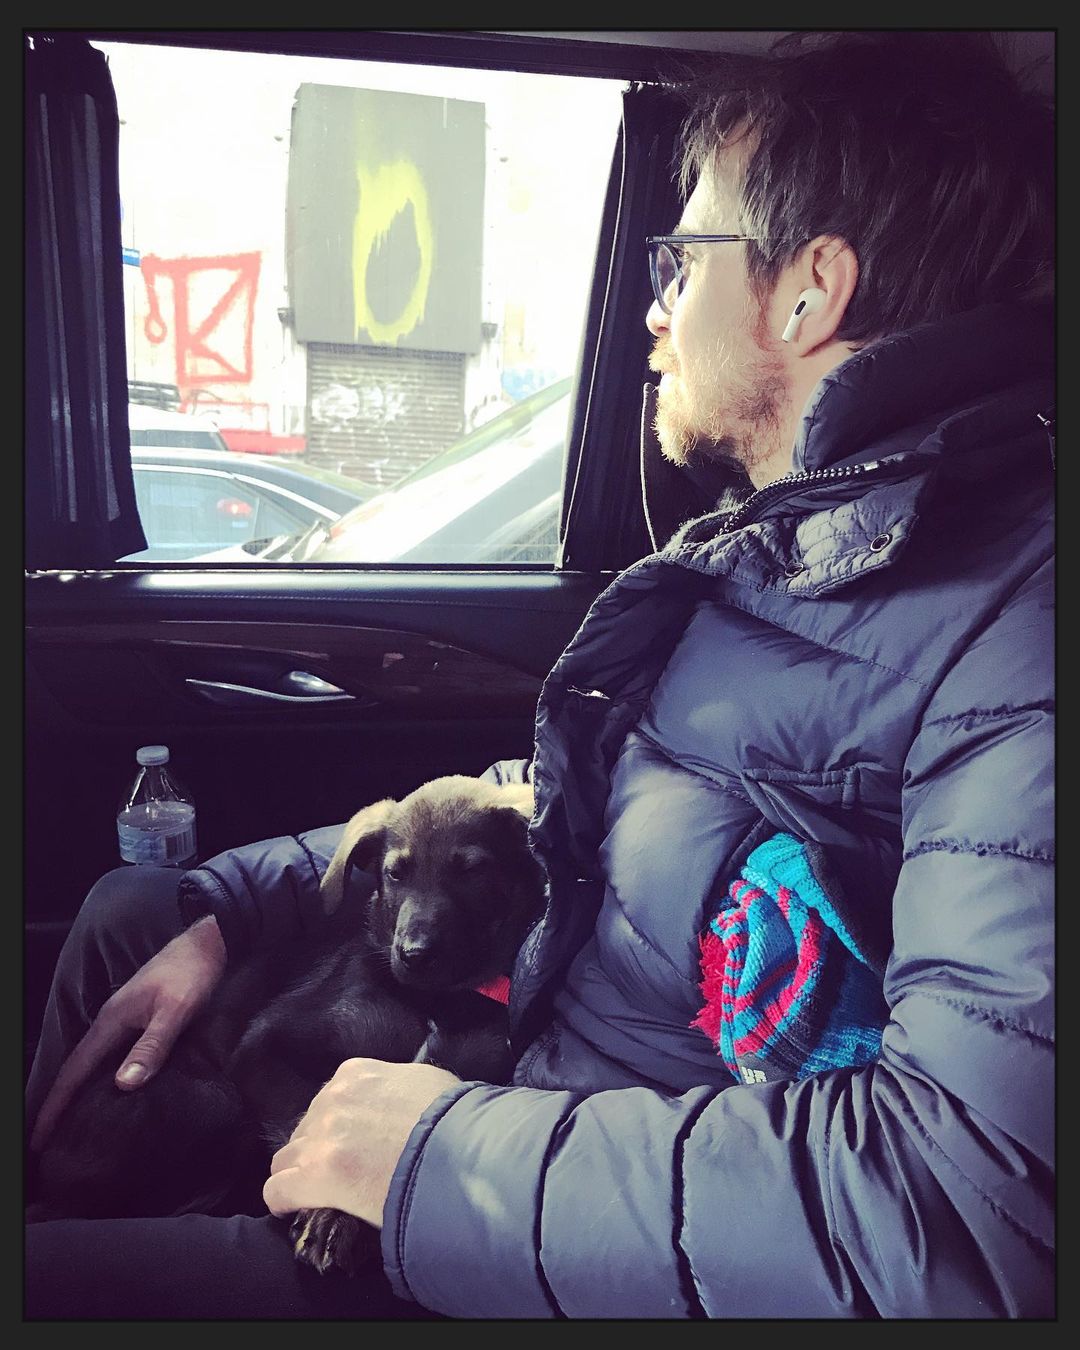 Since Leslie Bibb and Sam Rockwell are dog lovers they rescued a puppy anfd brought it home.